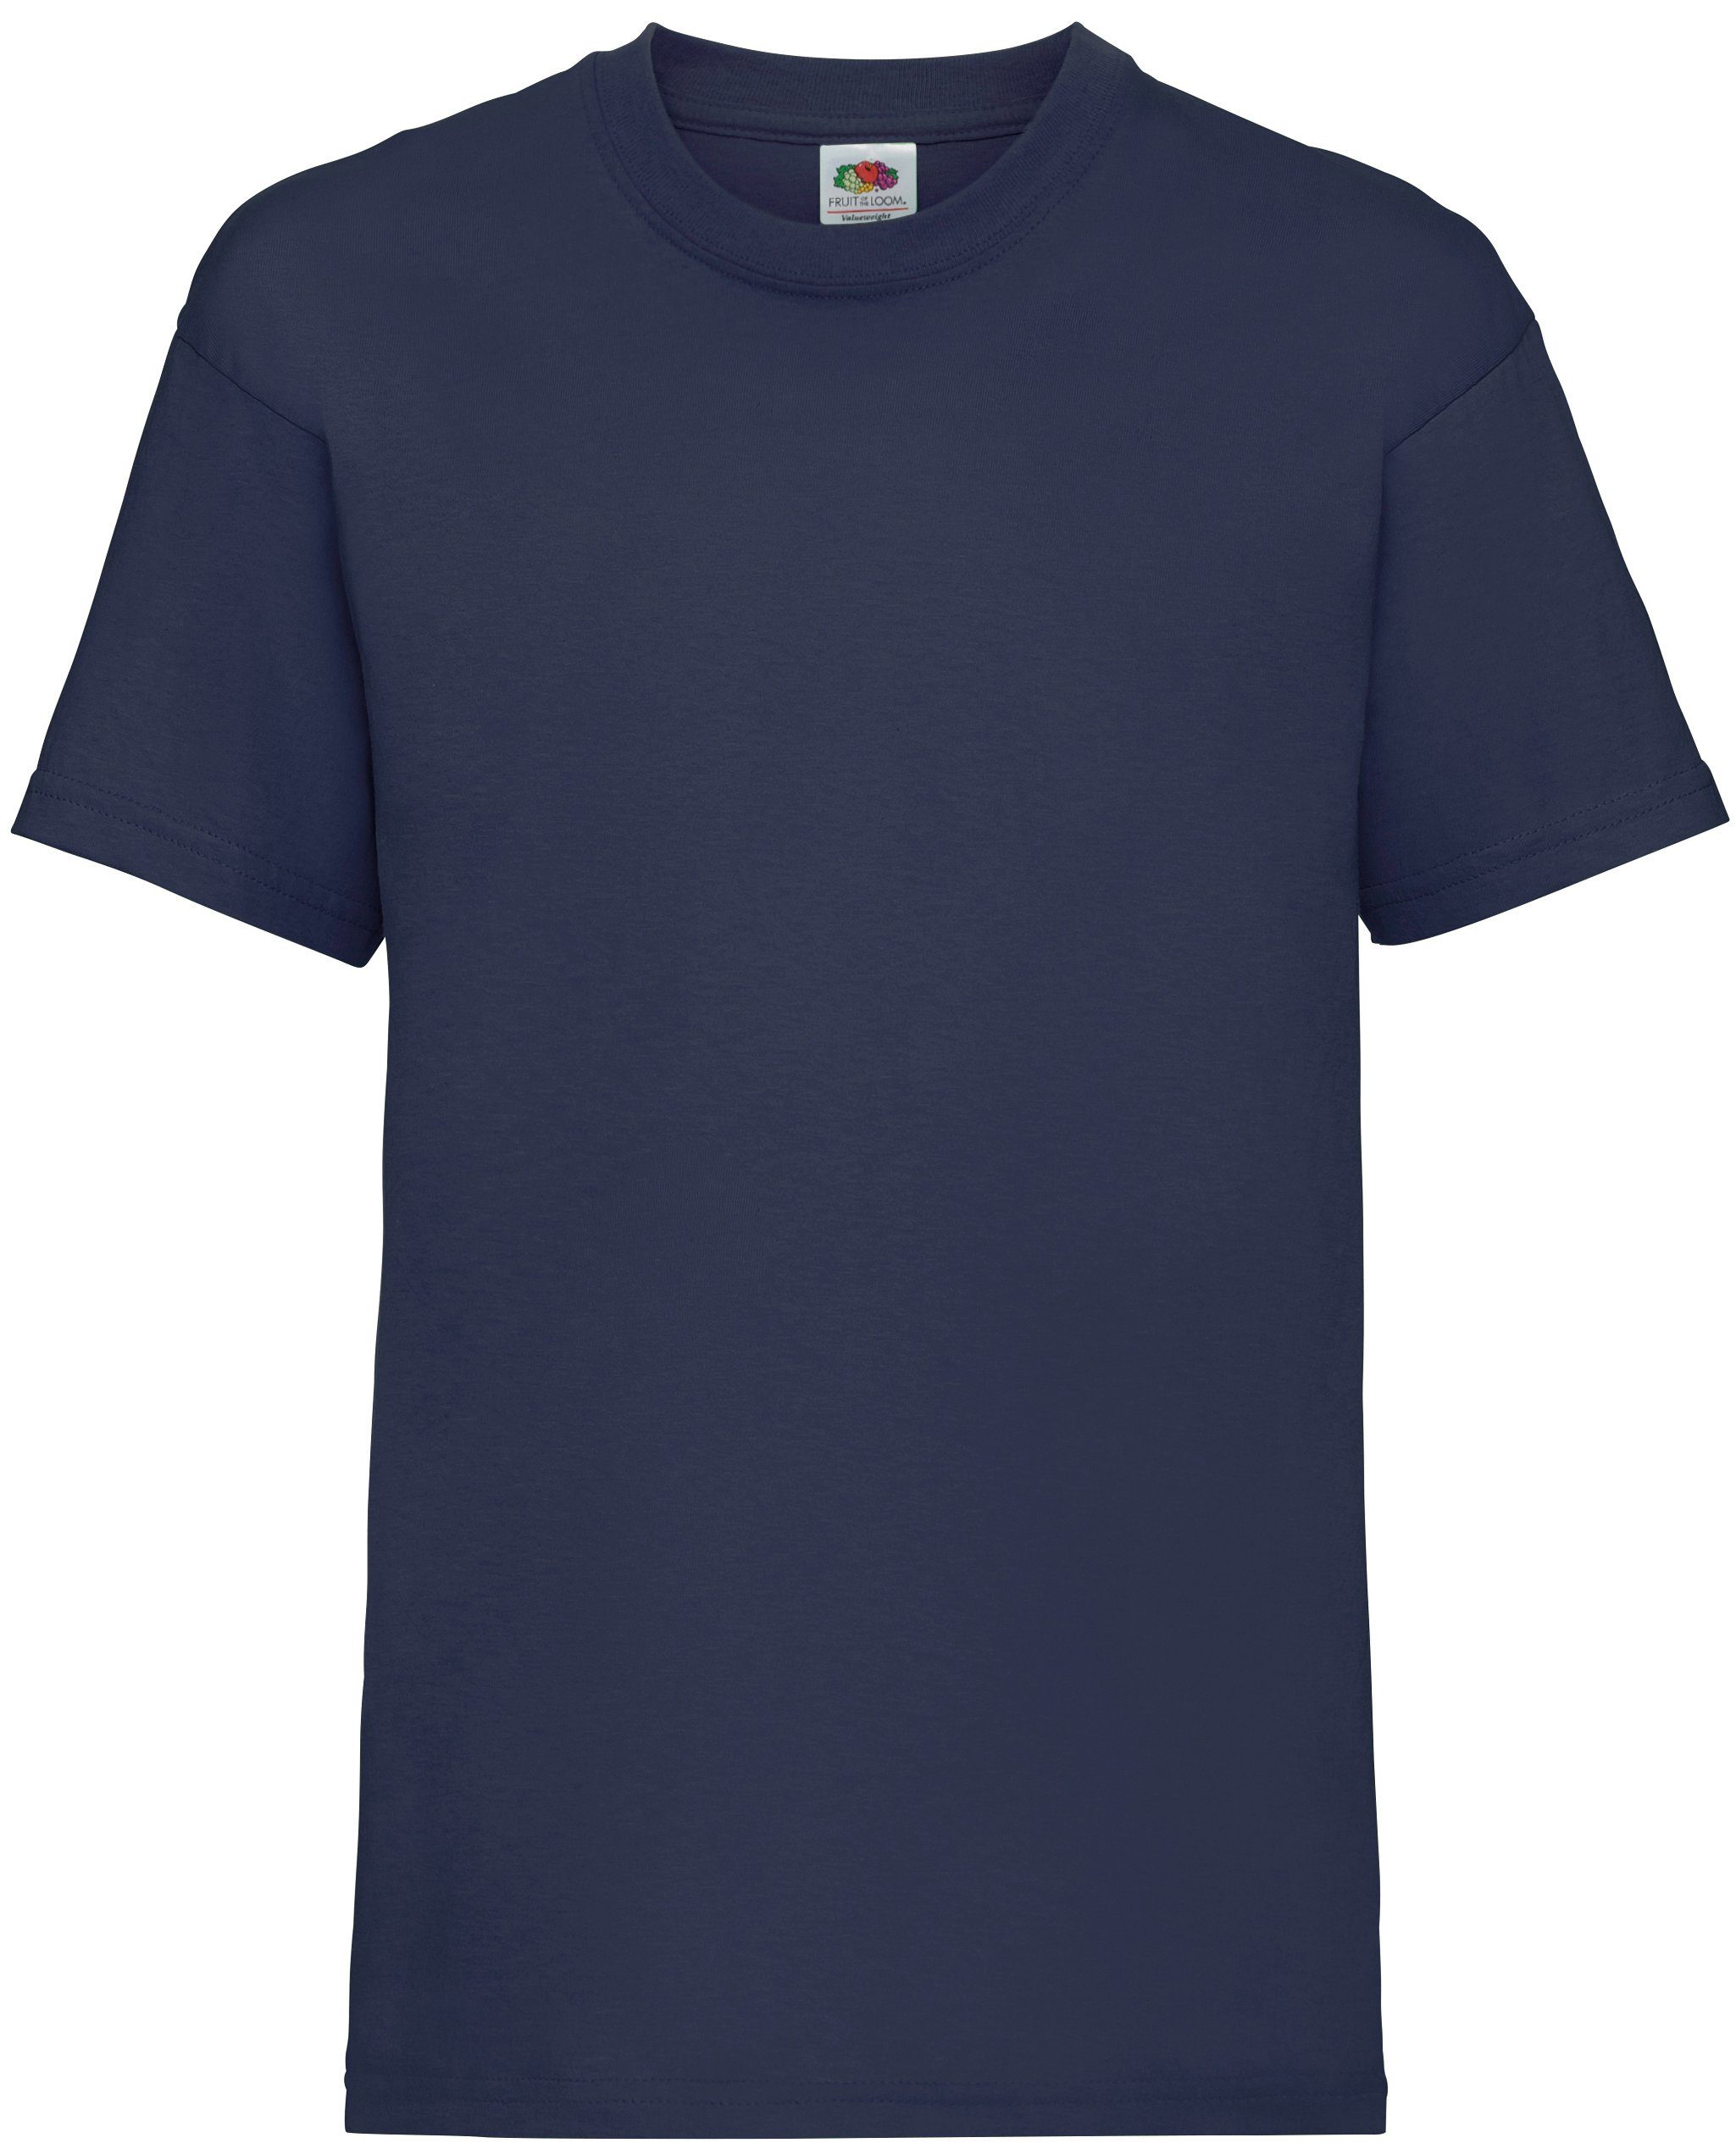 Fruit of the Loom Rundhalsshirt T Loom Fruit of Kids Valueweight navy the